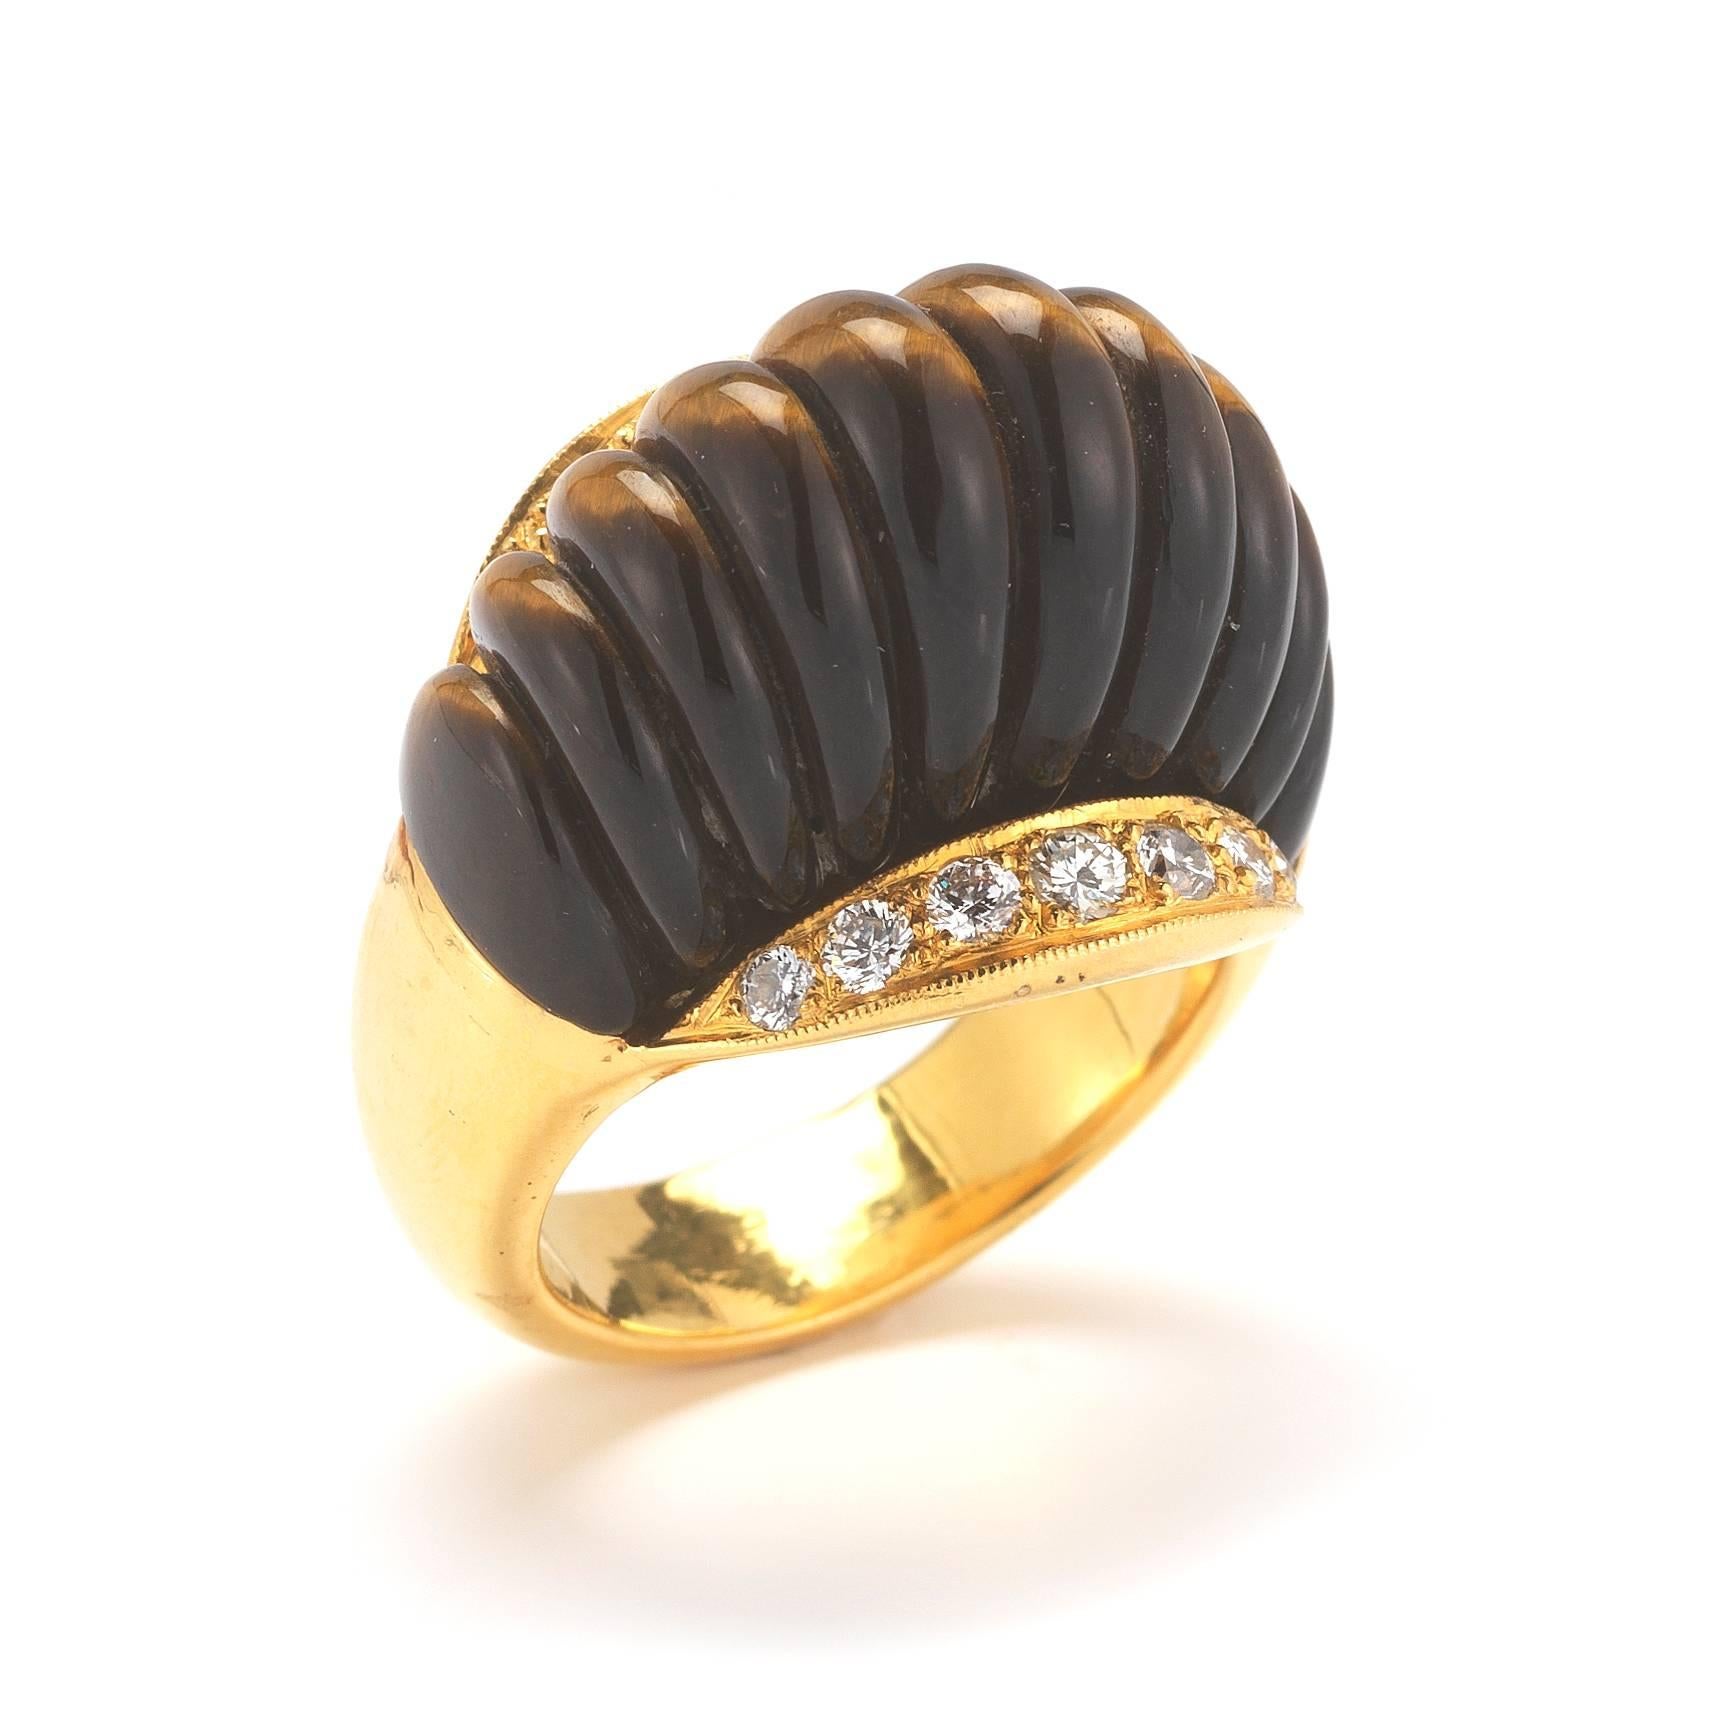 Stunning, unique Gucci ring set in 18K yellow gold. The ring features round brilliant diamonds (.75cts, GH/VS) and Tigers Eye. Size 8.